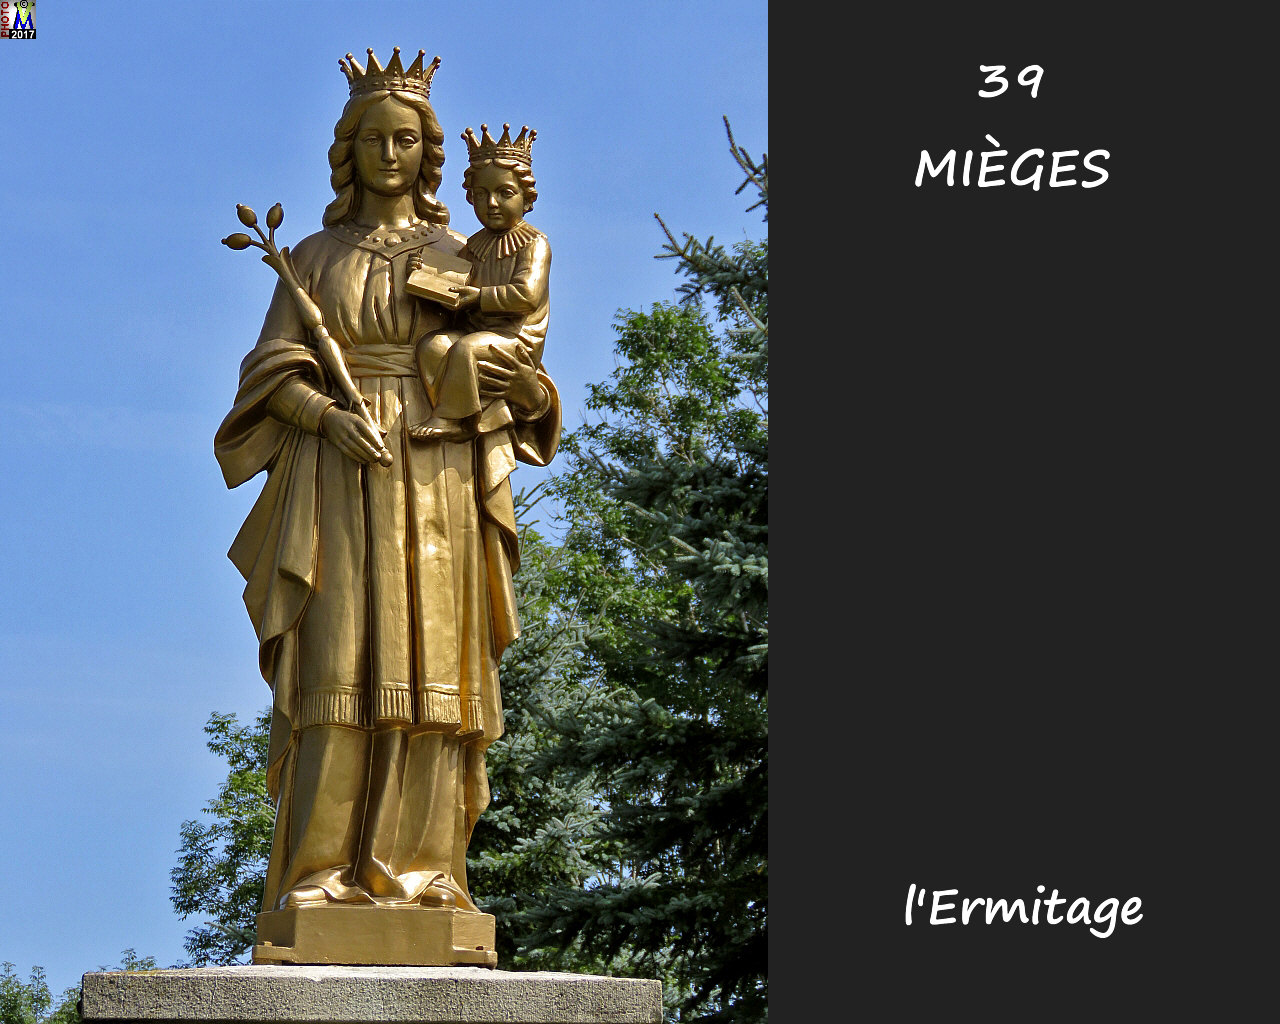 39MIEGES_Ermitage_152.jpg